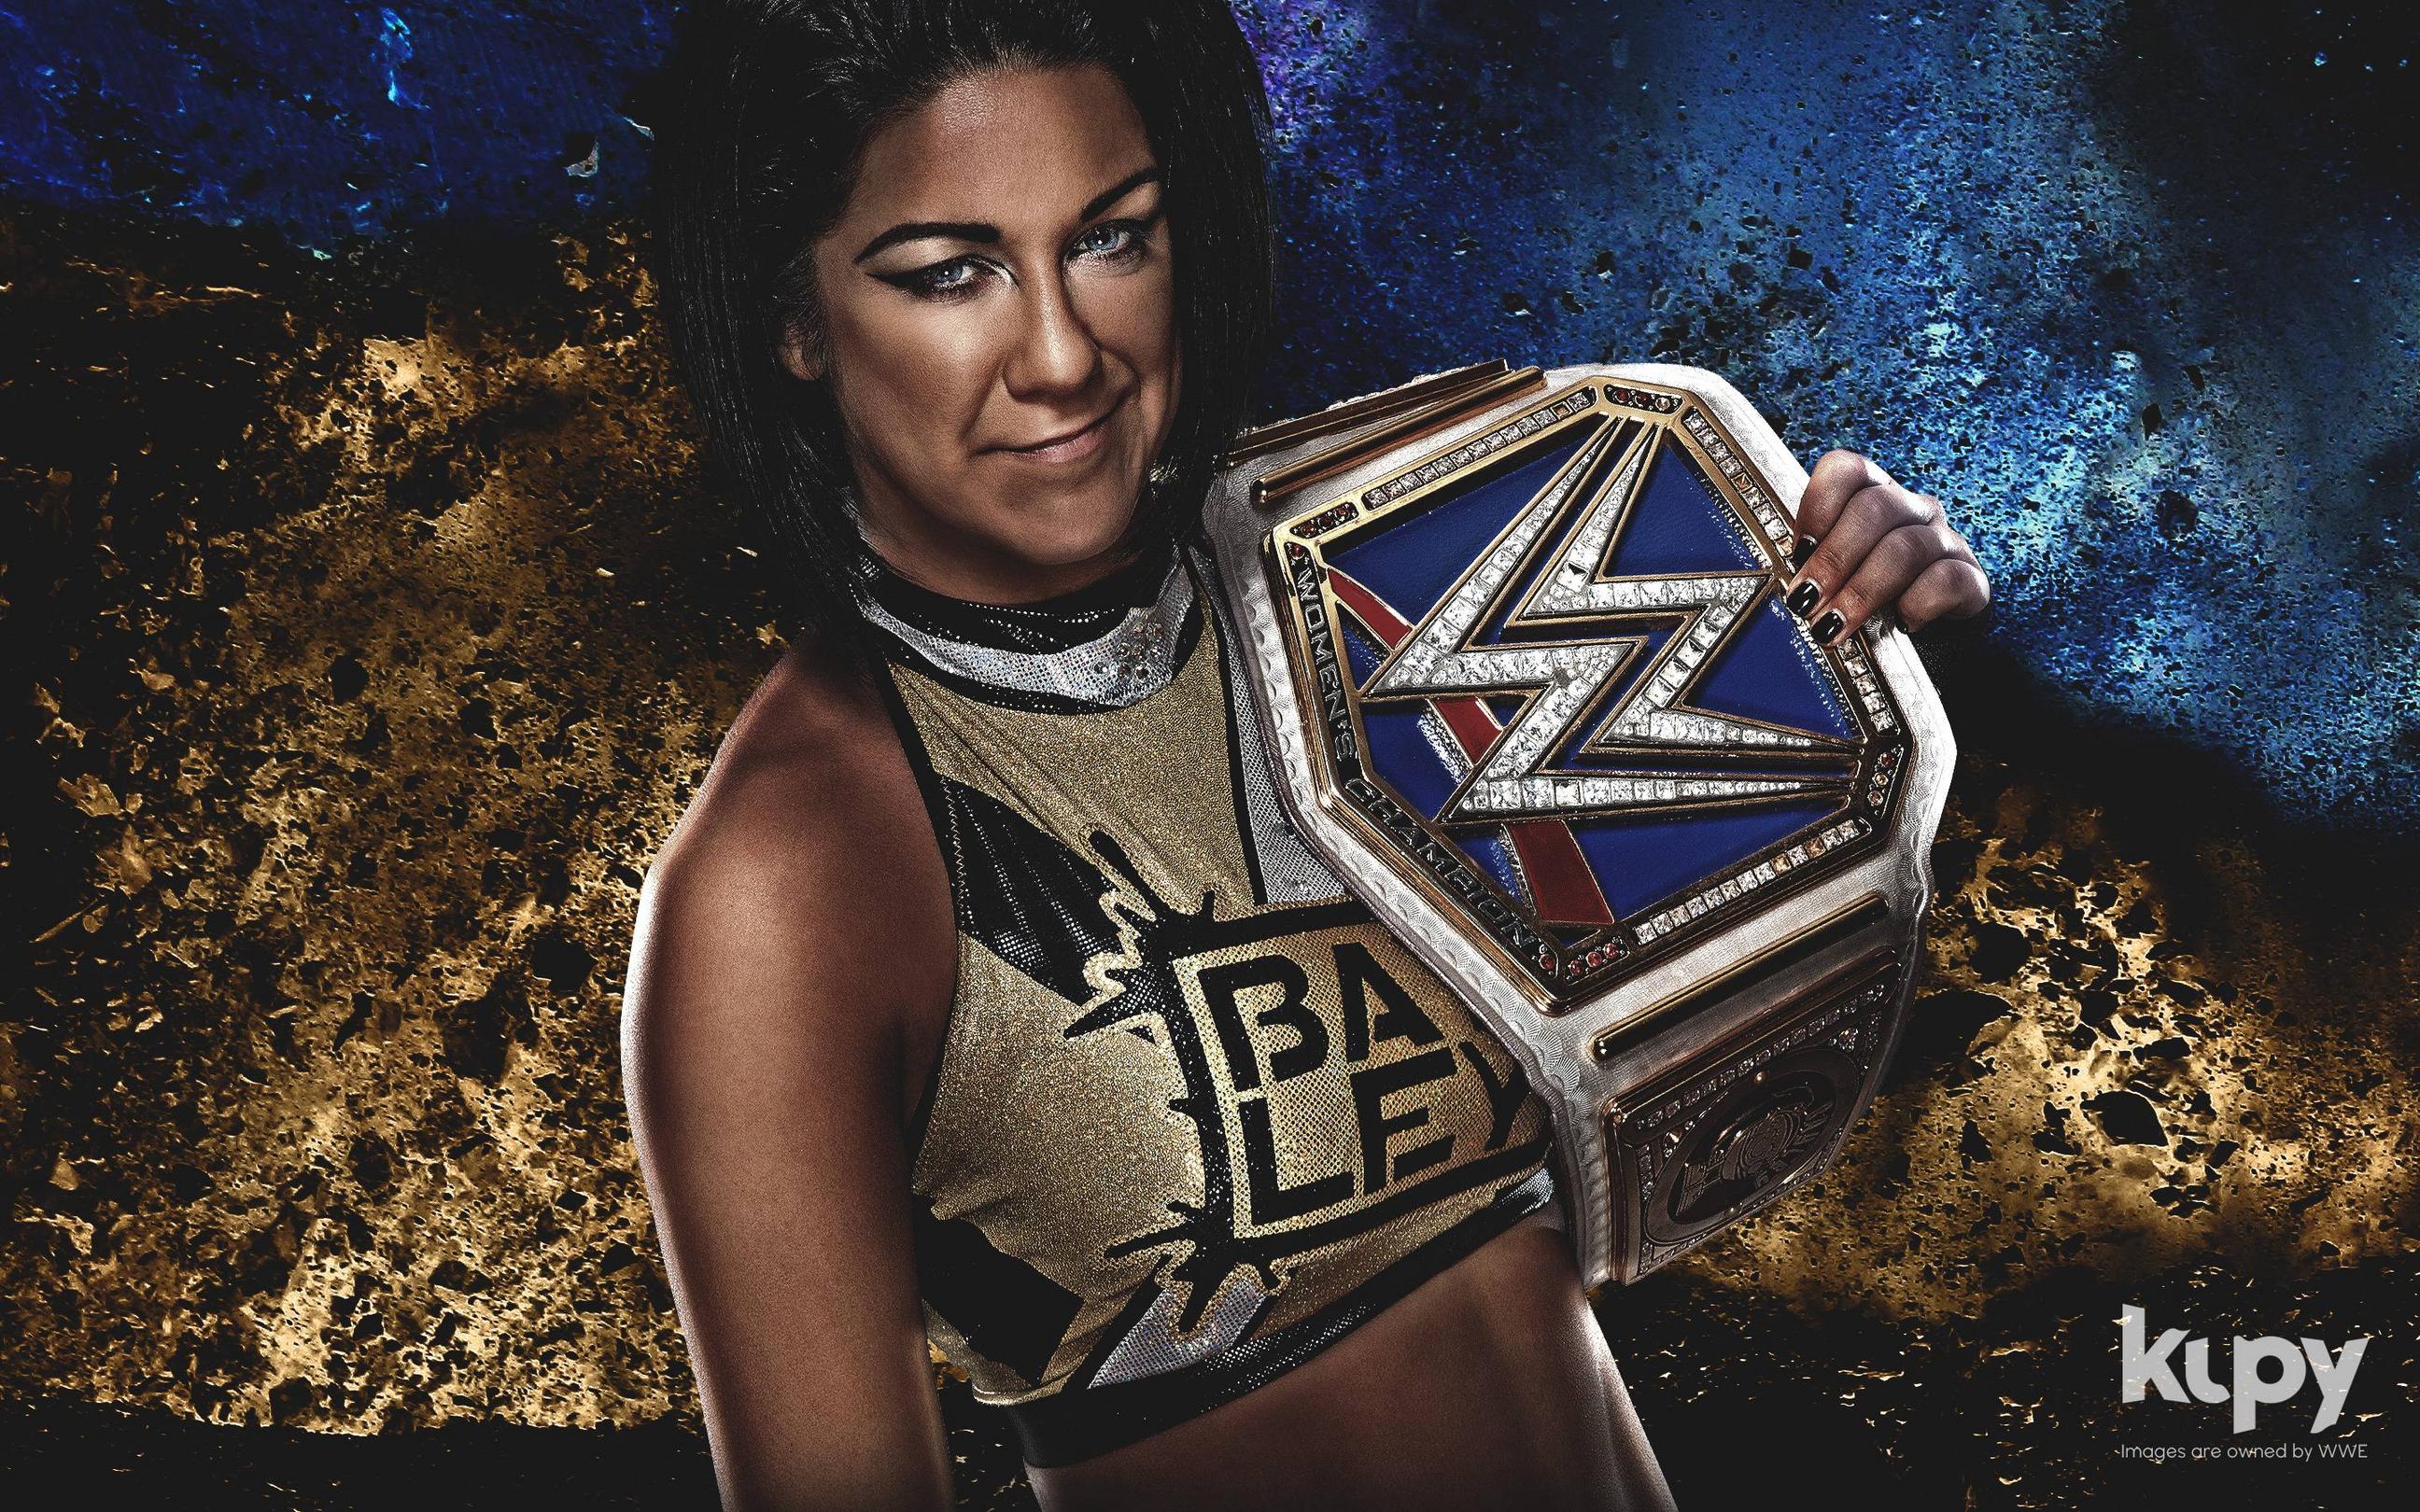 2880x1800 Kupy Wrestling Wallpaper 8211 The Latest Source For Your Wwe Wrestling Wallpaper Needs Mobile Hd And 4k Resolutions Available Blog Archive Heel Bayley Smackdown Womens Champion Wallpaper Kupy Wrestling Wallpaper